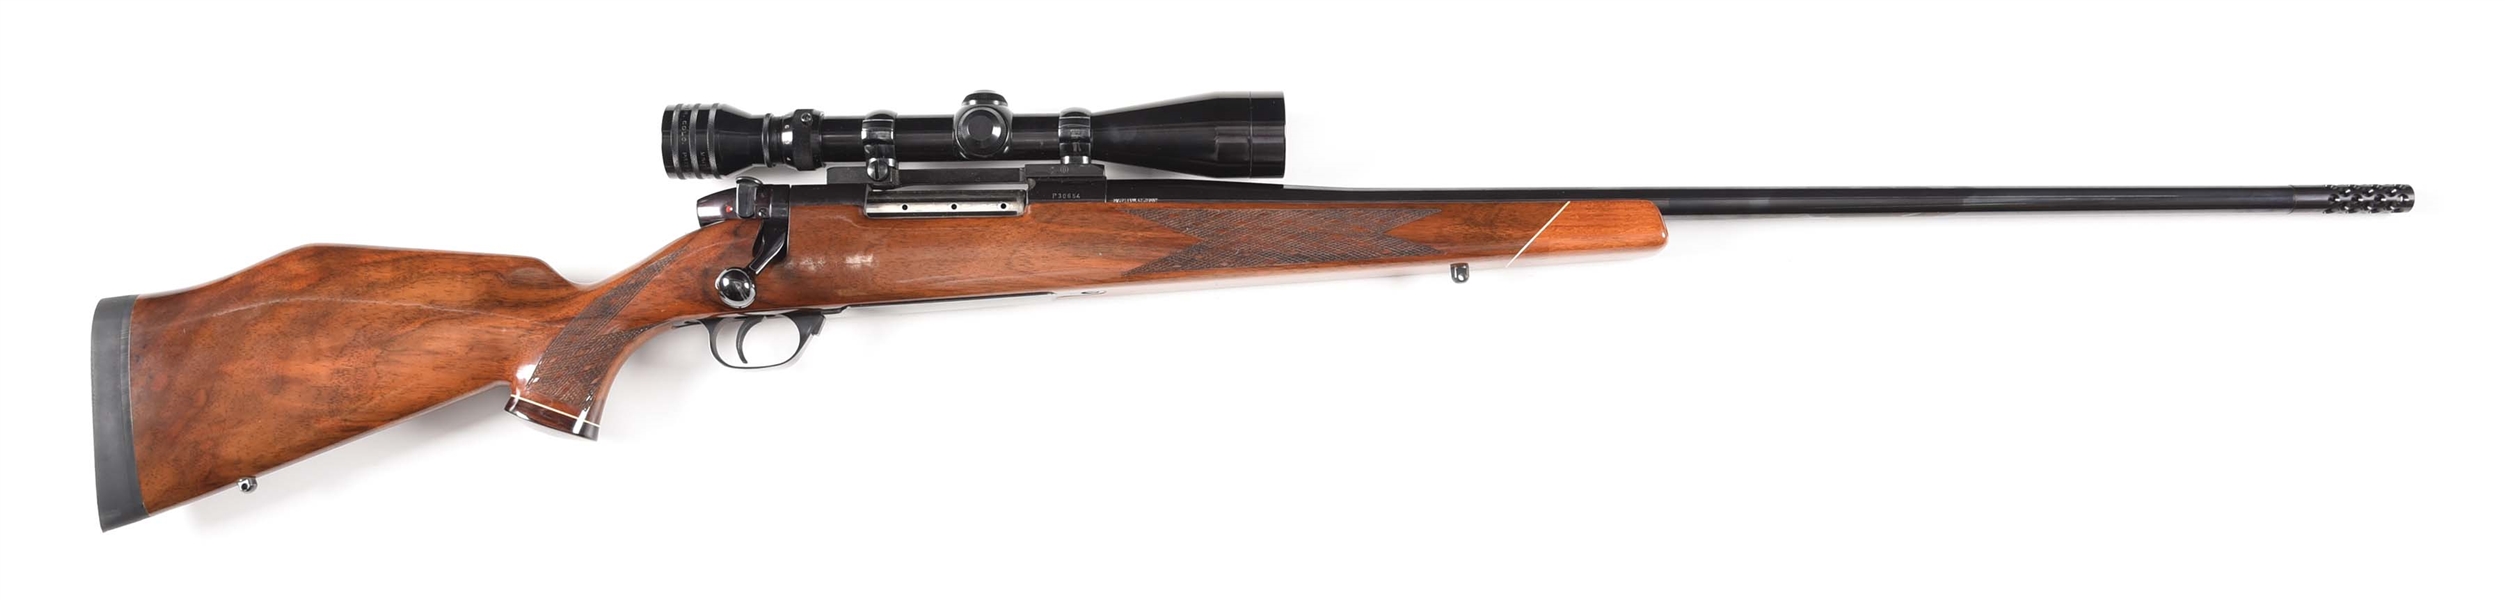 (C) WEST GERMAN WEATHERBY MARK V BOLT ACTION RIFLE WITH SCOPE